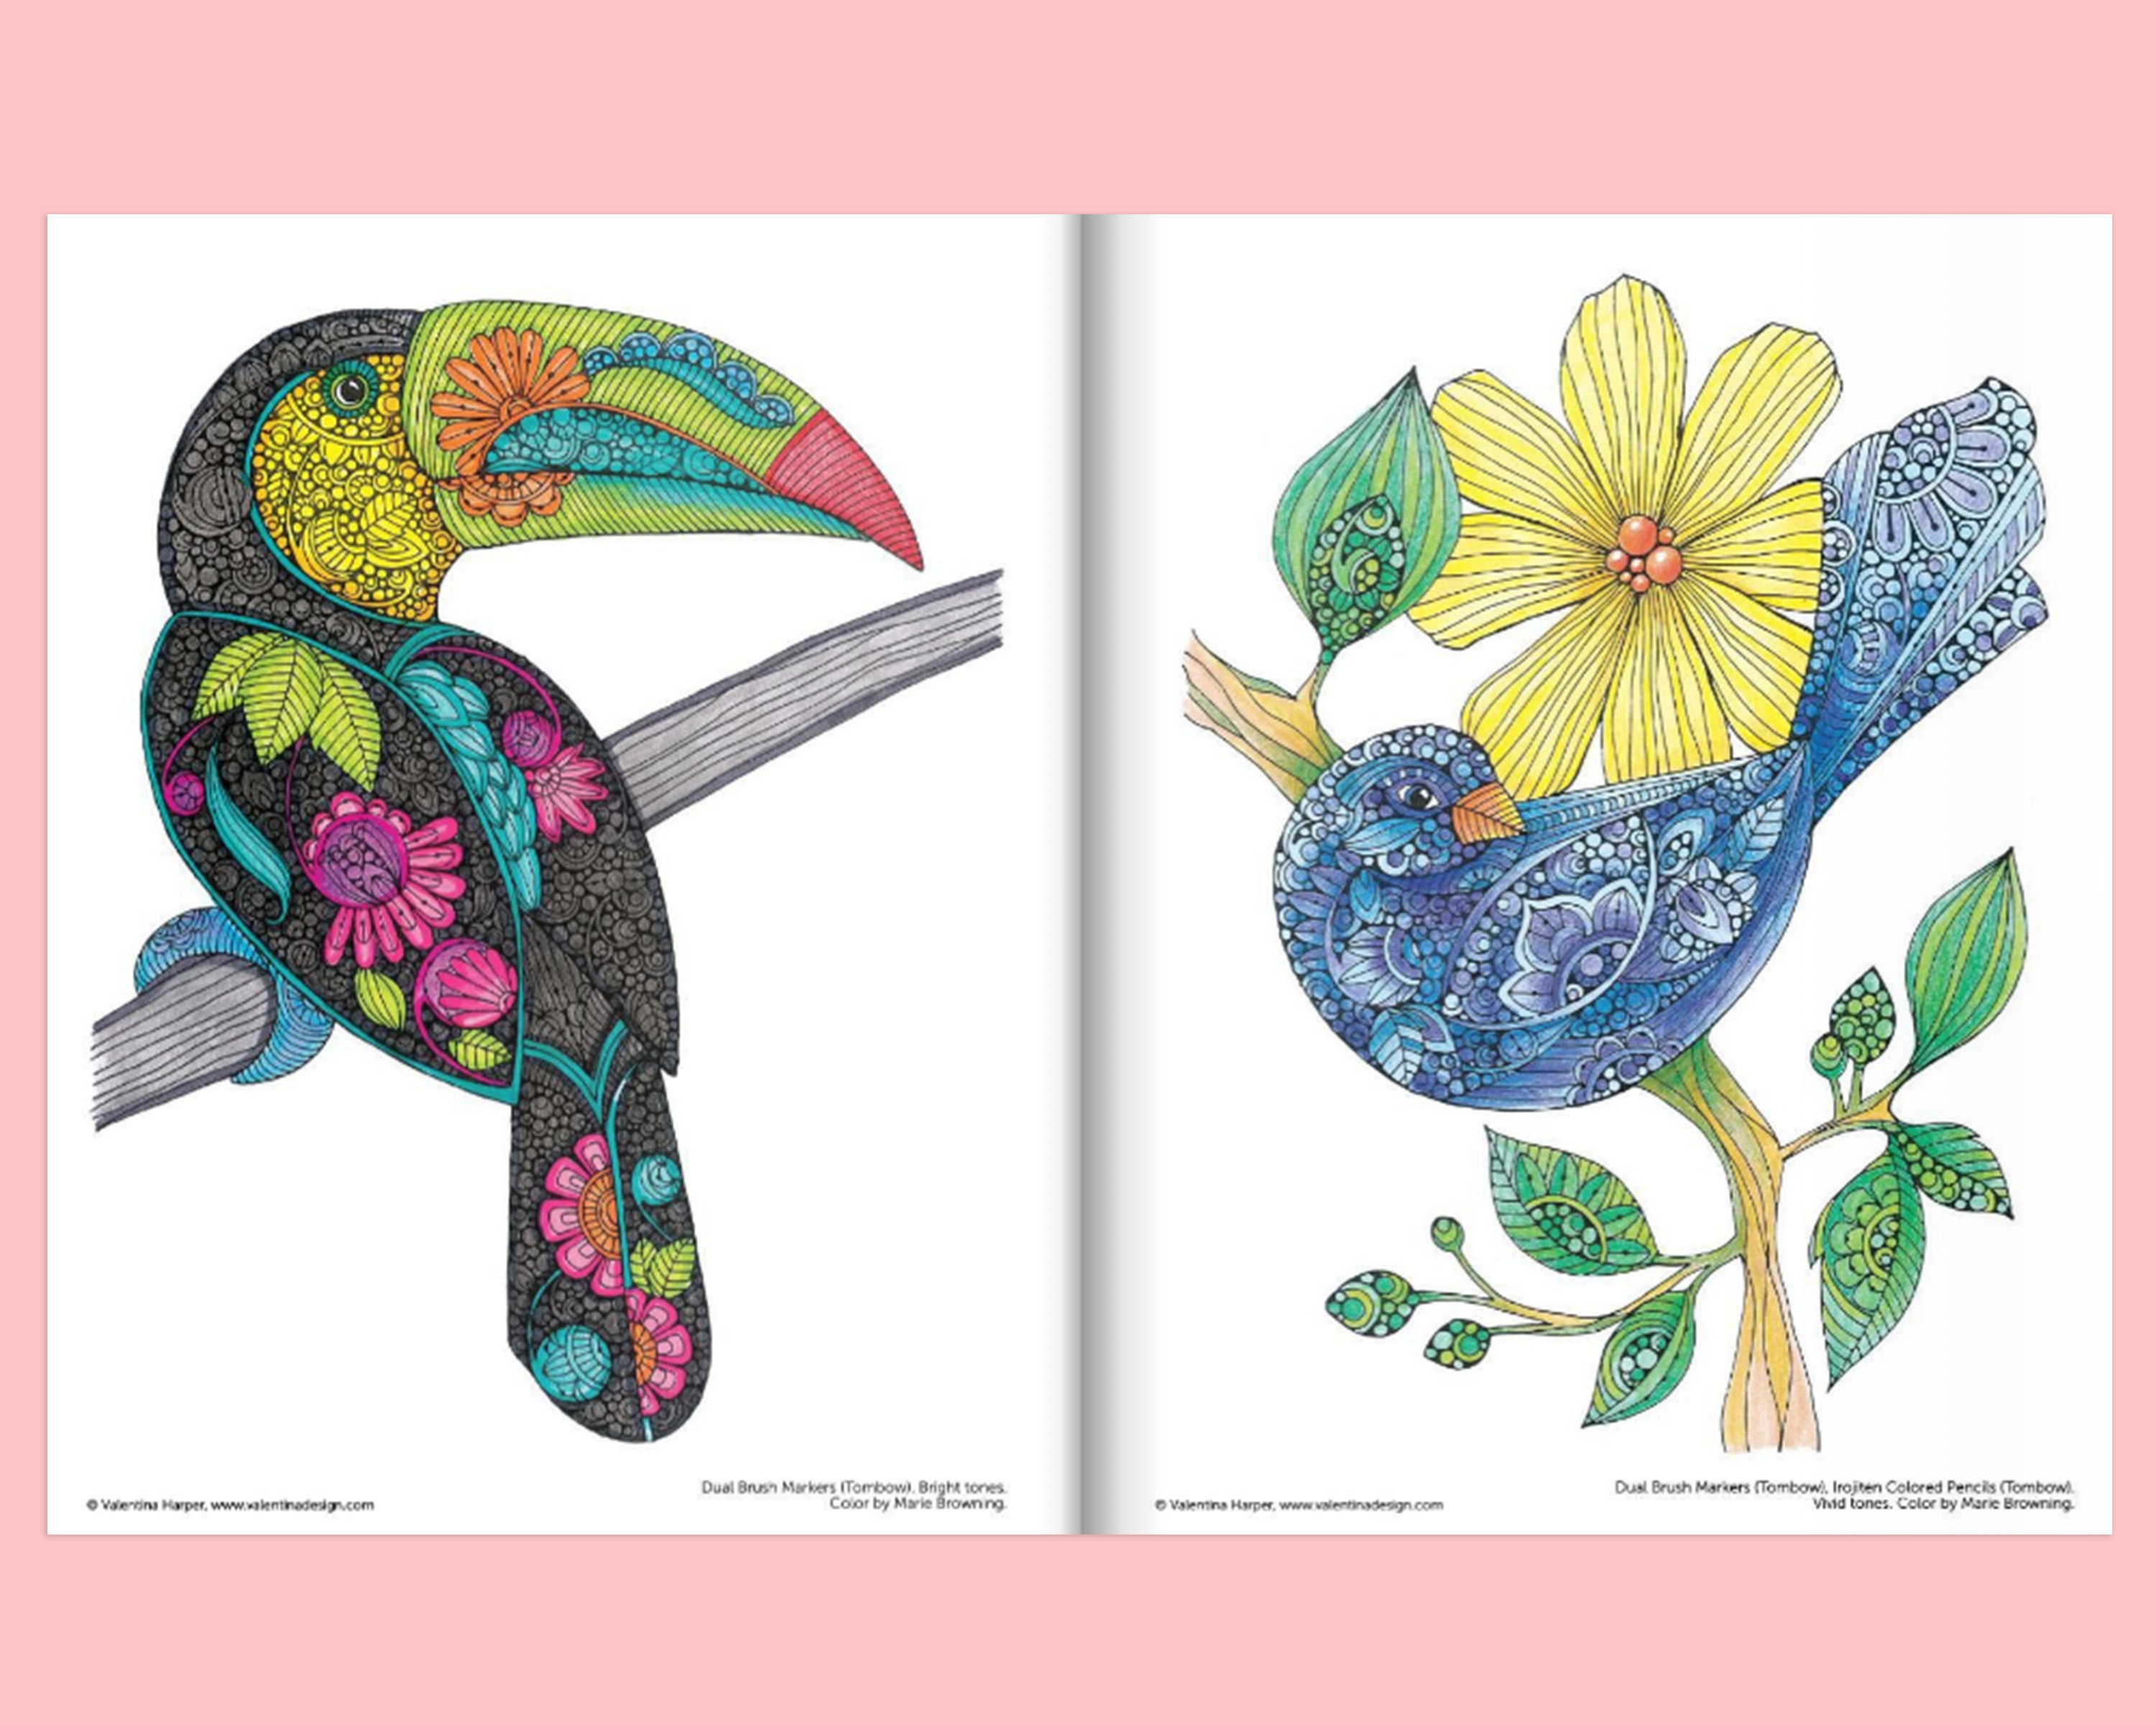 Coloring book creative coloring birds coloring book nature coloring valentina harper marie browning bird lover gift coloring gift